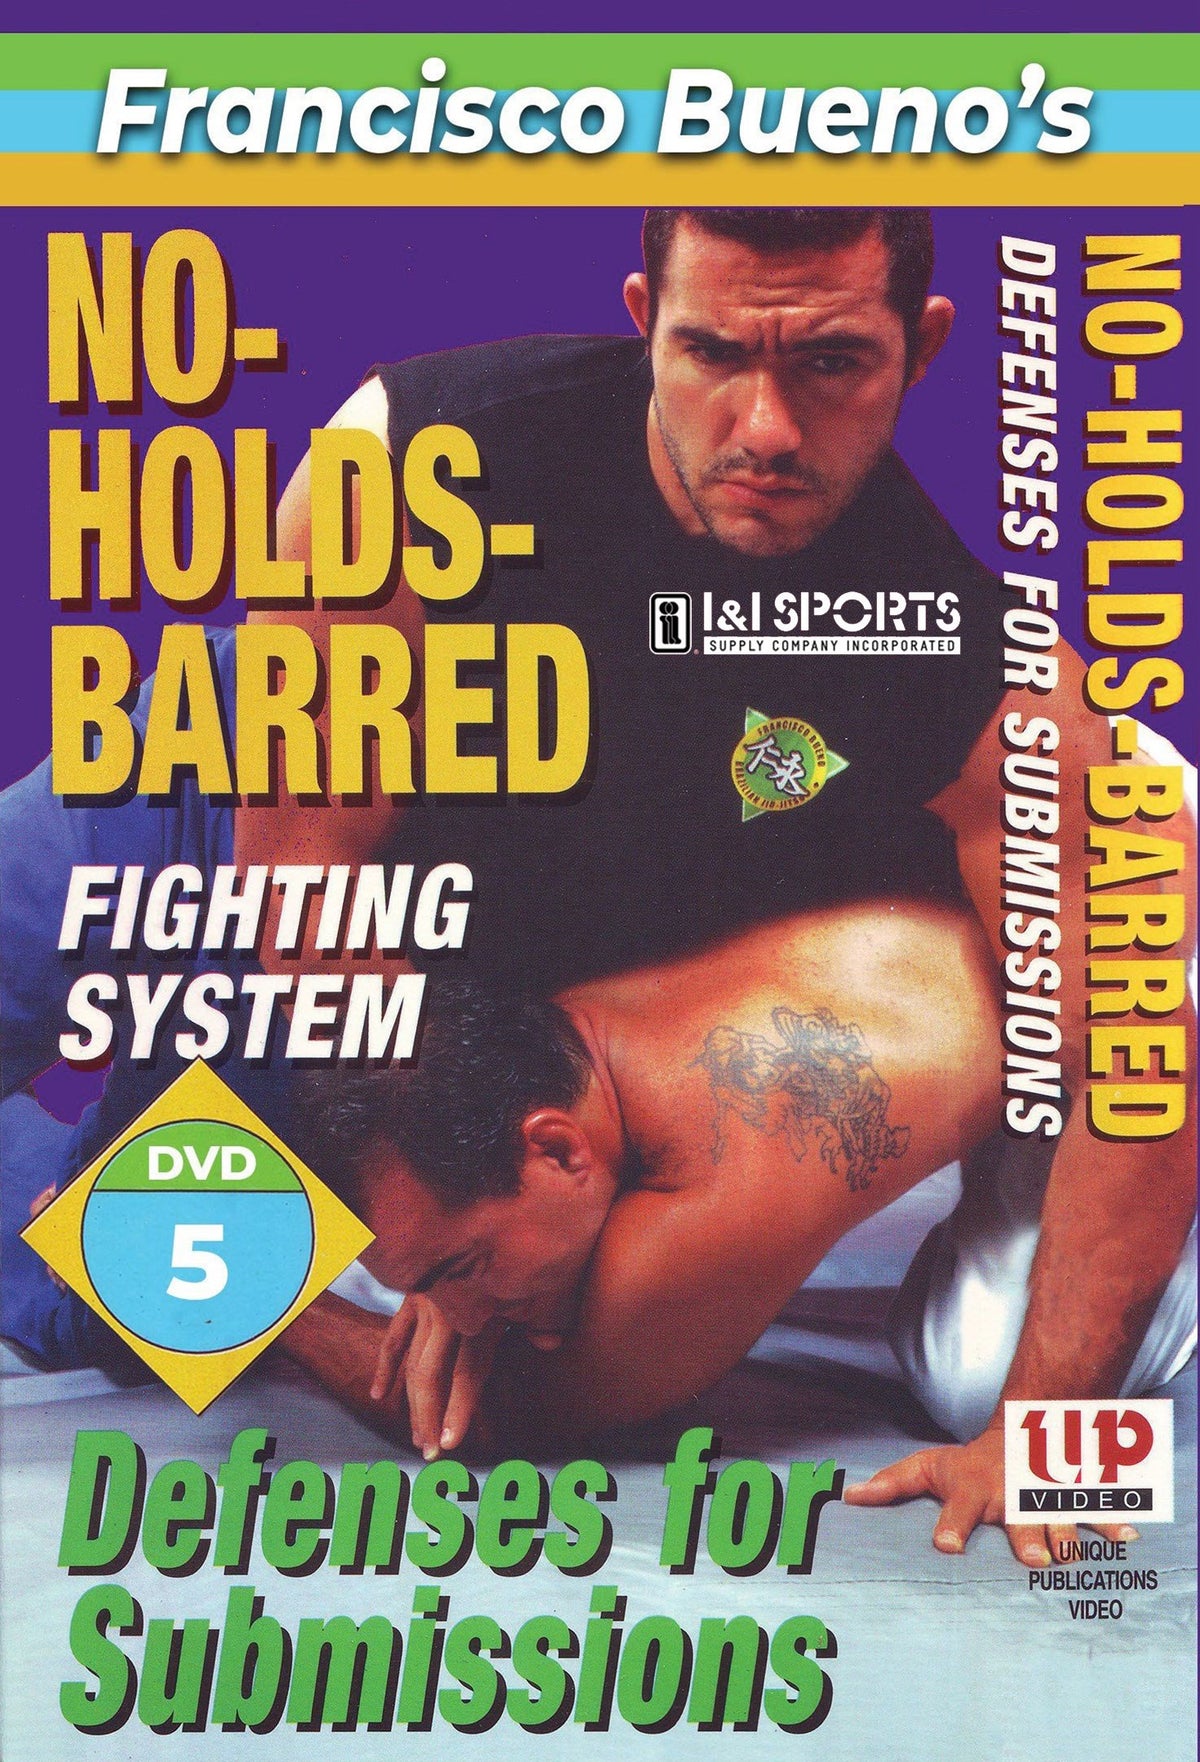 No Holds Barred #5 Vale Tudo Defenses for Submission DVD Francisco Bueno mma